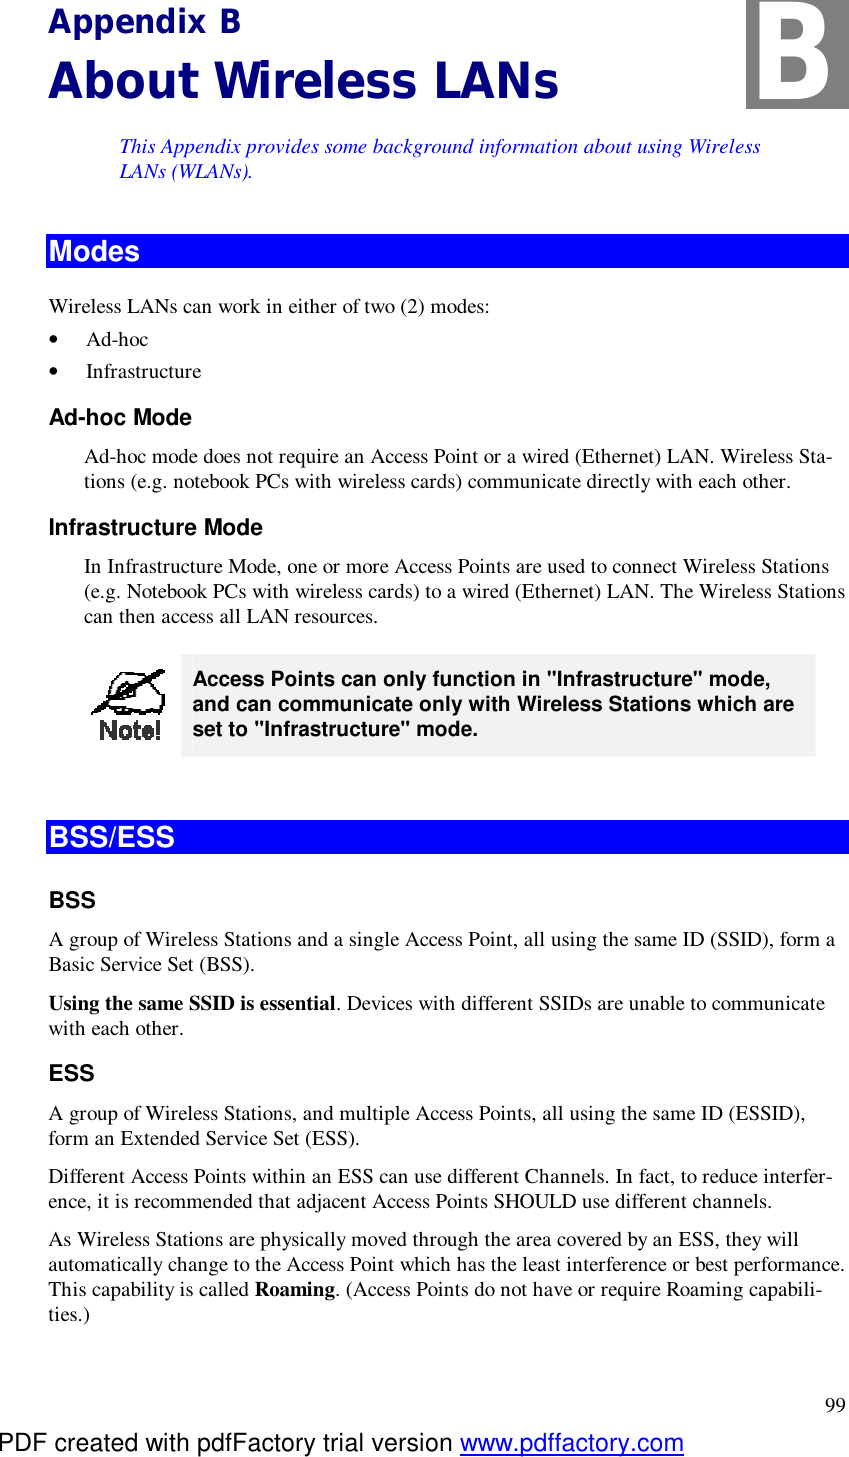  99 Appendix B About Wireless LANs This Appendix provides some background information about using Wireless LANs (WLANs). Modes Wireless LANs can work in either of two (2) modes: •  Ad-hoc •  Infrastructure Ad-hoc Mode Ad-hoc mode does not require an Access Point or a wired (Ethernet) LAN. Wireless Sta-tions (e.g. notebook PCs with wireless cards) communicate directly with each other. Infrastructure Mode In Infrastructure Mode, one or more Access Points are used to connect Wireless Stations (e.g. Notebook PCs with wireless cards) to a wired (Ethernet) LAN. The Wireless Stations can then access all LAN resources.  Access Points can only function in &quot;Infrastructure&quot; mode, and can communicate only with Wireless Stations which are set to &quot;Infrastructure&quot; mode.  BSS/ESS BSS A group of Wireless Stations and a single Access Point, all using the same ID (SSID), form a Basic Service Set (BSS). Using the same SSID is essential. Devices with different SSIDs are unable to communicate with each other. ESS A group of Wireless Stations, and multiple Access Points, all using the same ID (ESSID), form an Extended Service Set (ESS). Different Access Points within an ESS can use different Channels. In fact, to reduce interfer-ence, it is recommended that adjacent Access Points SHOULD use different channels. As Wireless Stations are physically moved through the area covered by an ESS, they will automatically change to the Access Point which has the least interference or best performance. This capability is called Roaming. (Access Points do not have or require Roaming capabili-ties.) B PDF created with pdfFactory trial version www.pdffactory.com